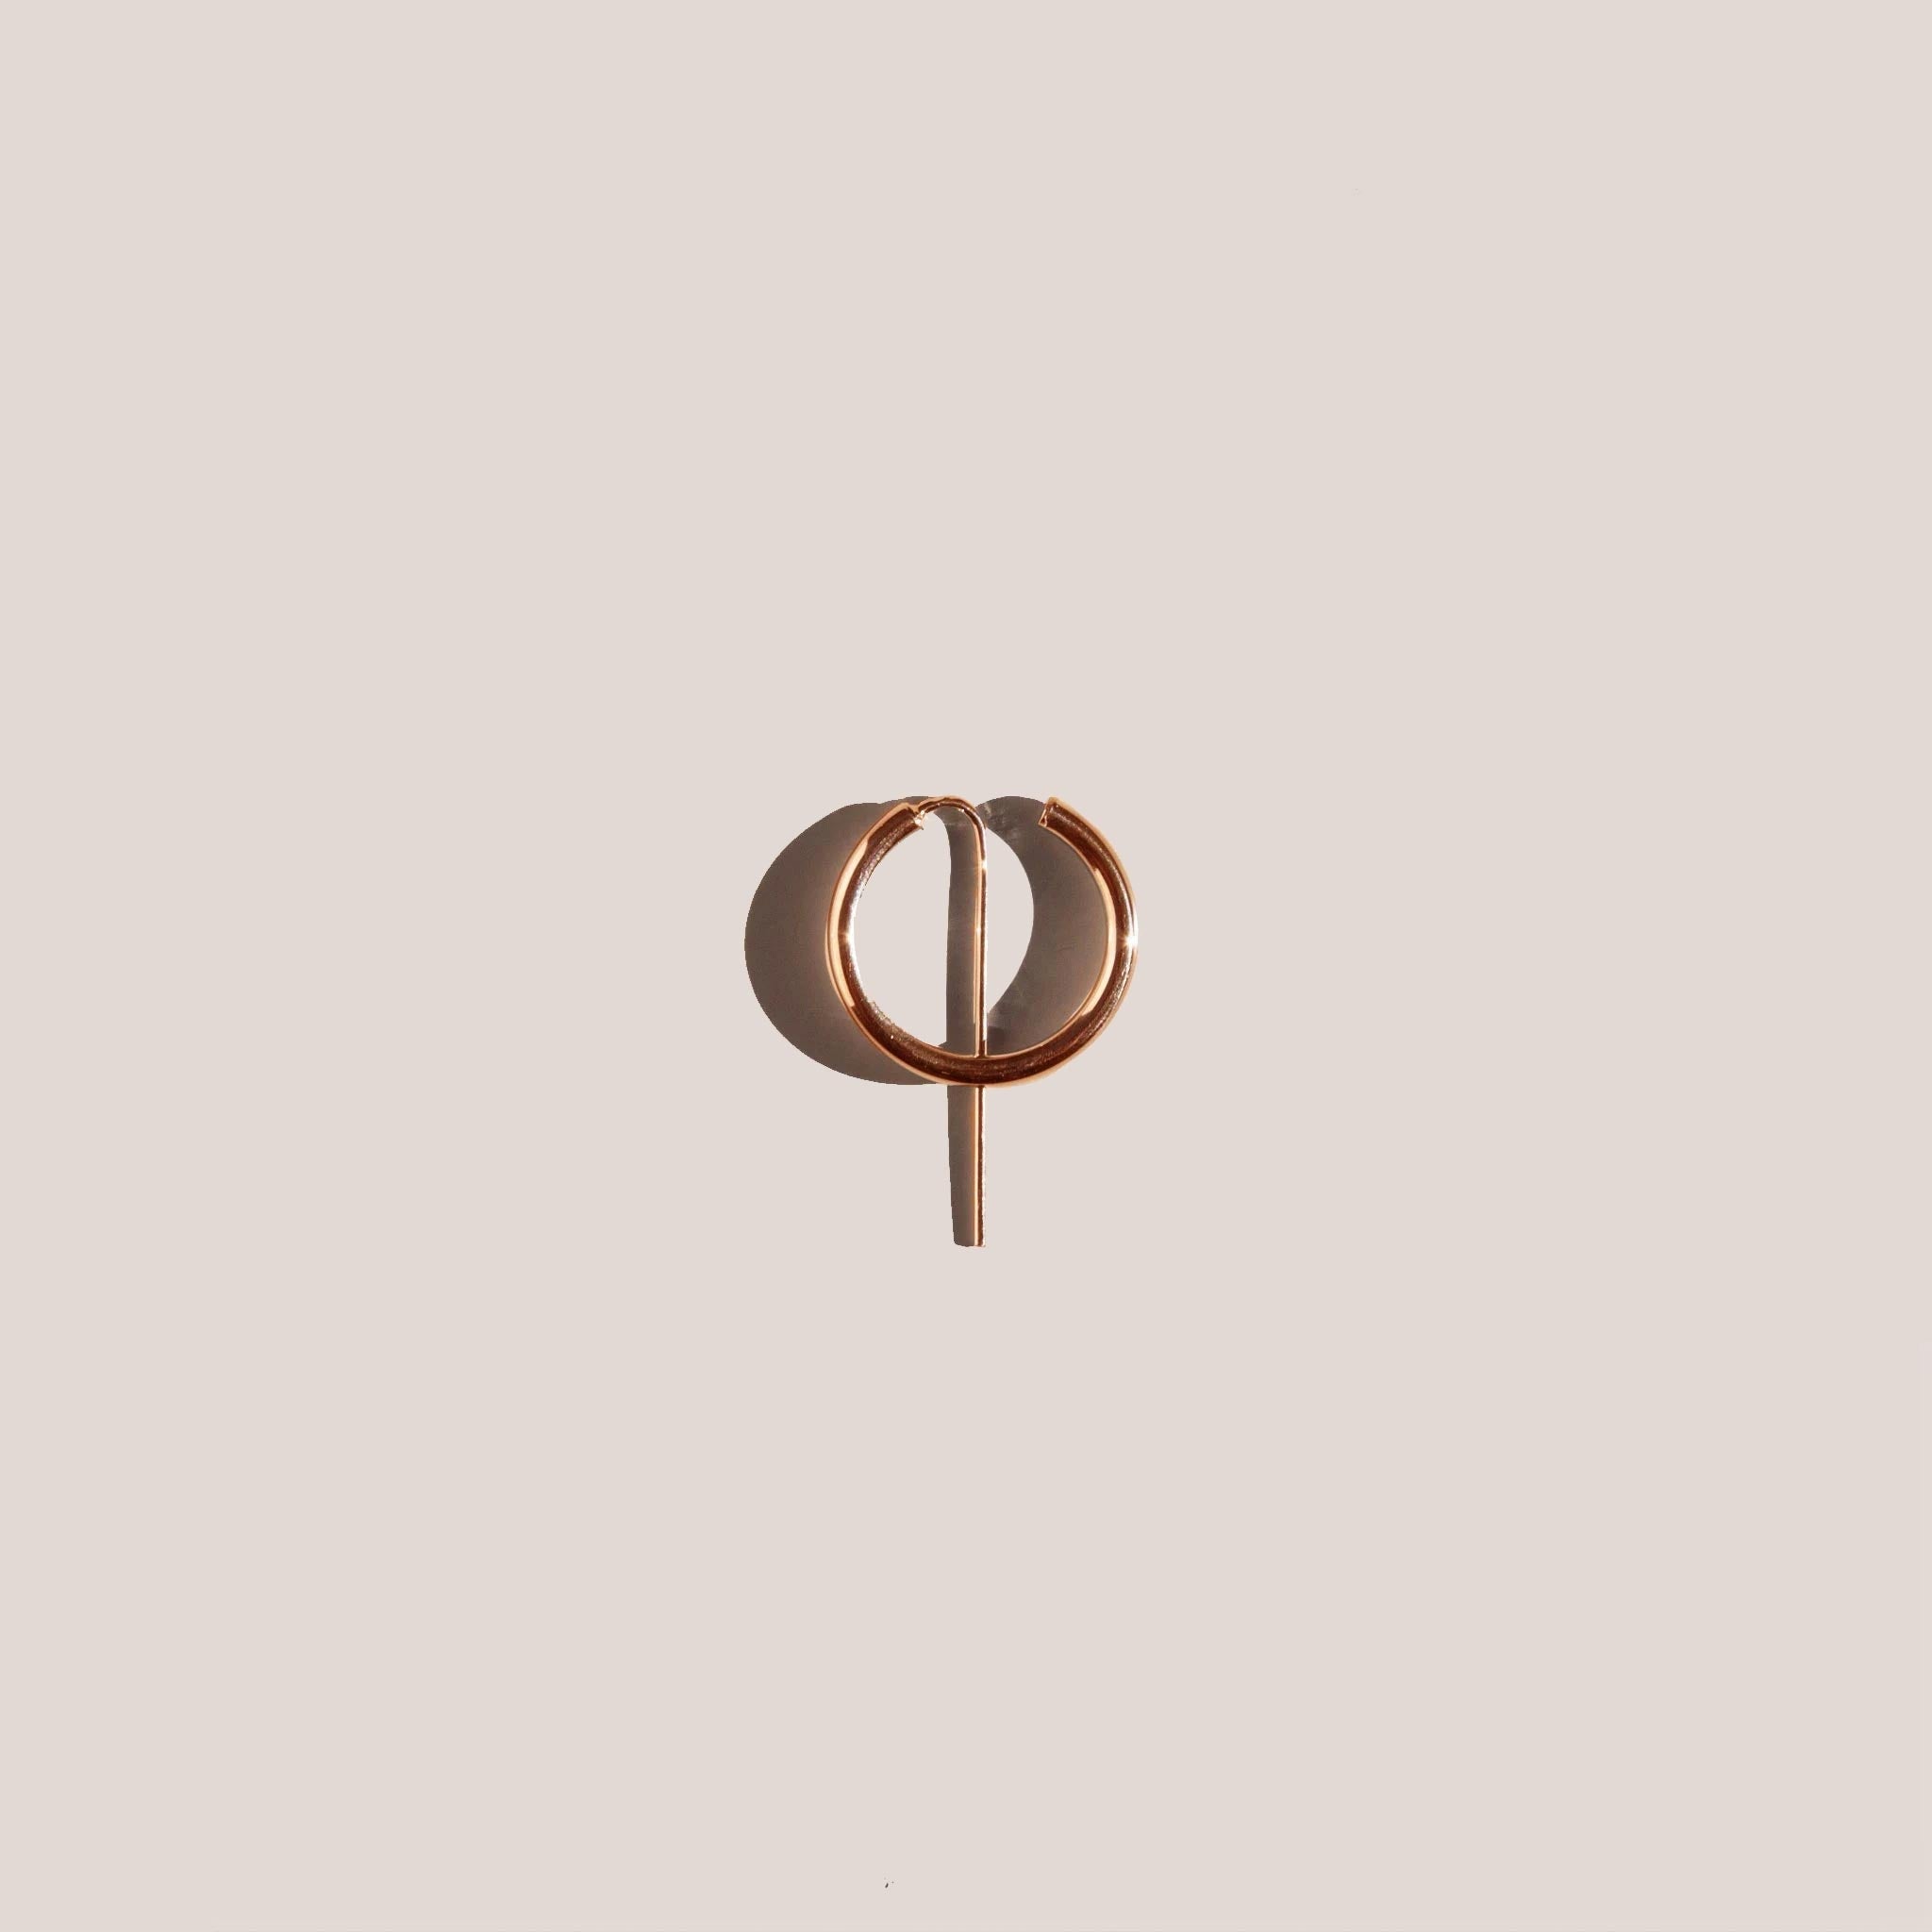 Jaclyn Moran - Mini Hoop & Post Earring in Rose Gold, available at LCD.